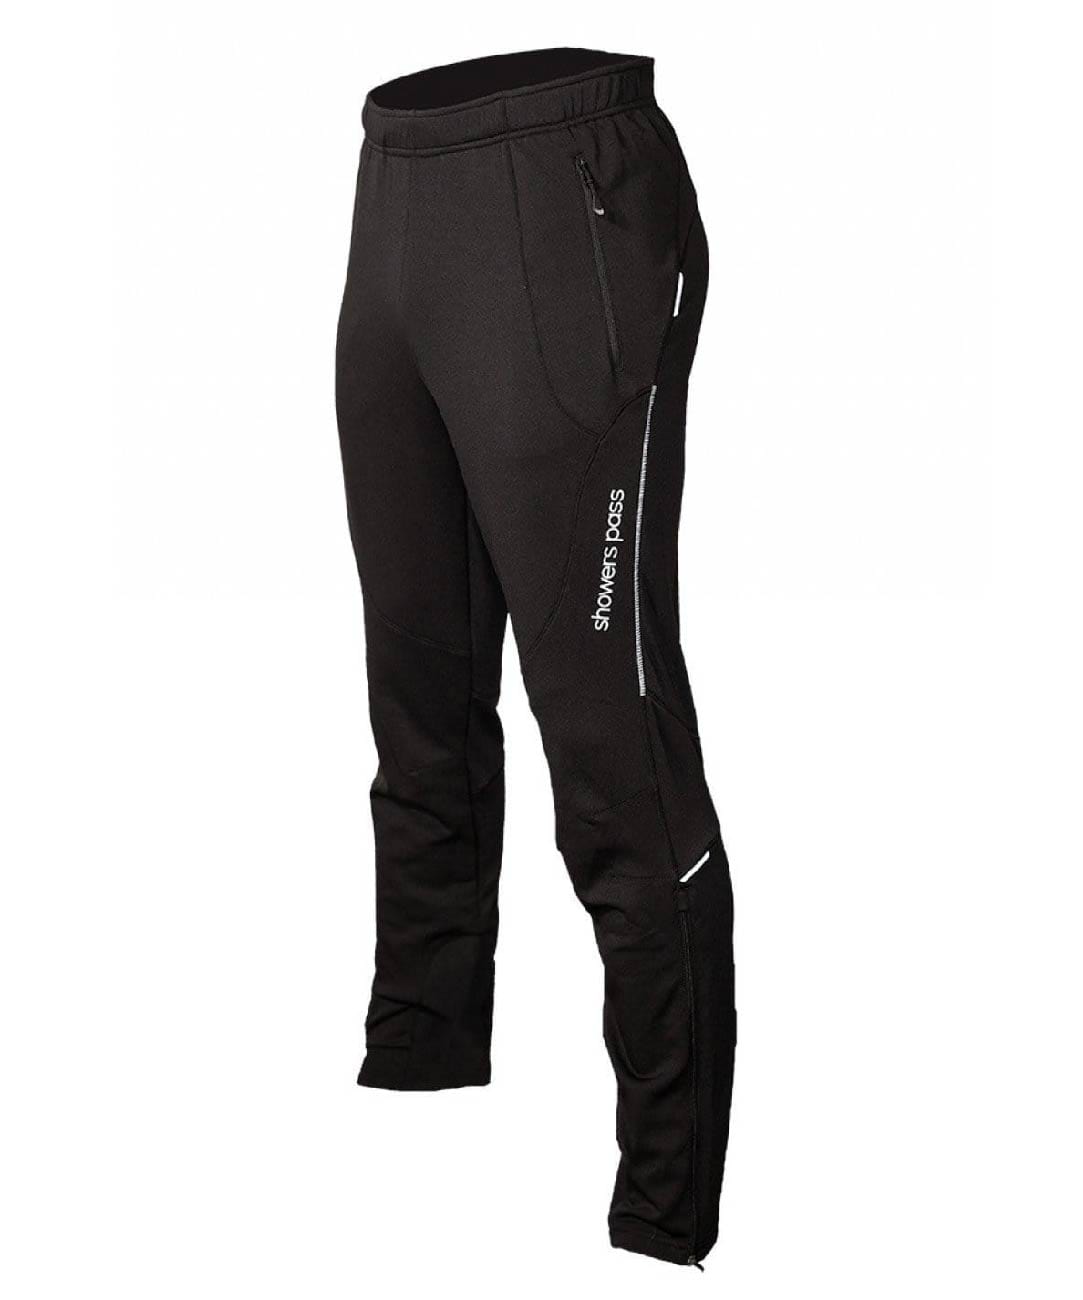 Avenue Pants - Winter Weight - Black with Matte Black X – The Comfort Club